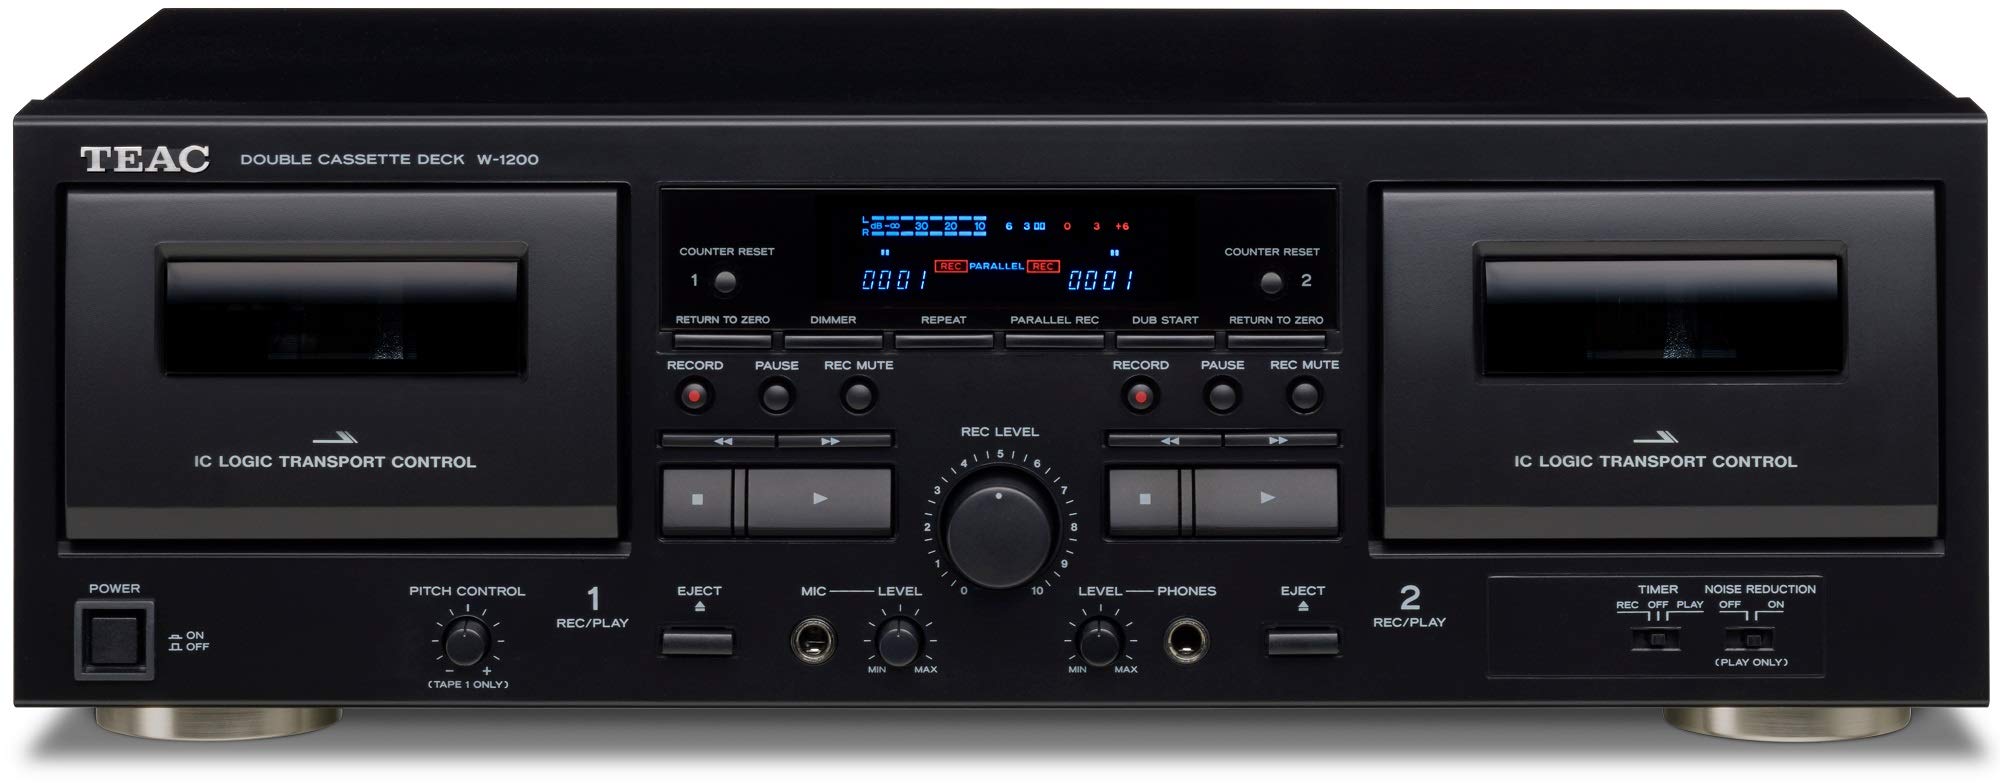 Teac W-1200 Dual Cassette Deck with Recorder/ USB/ Pitc...